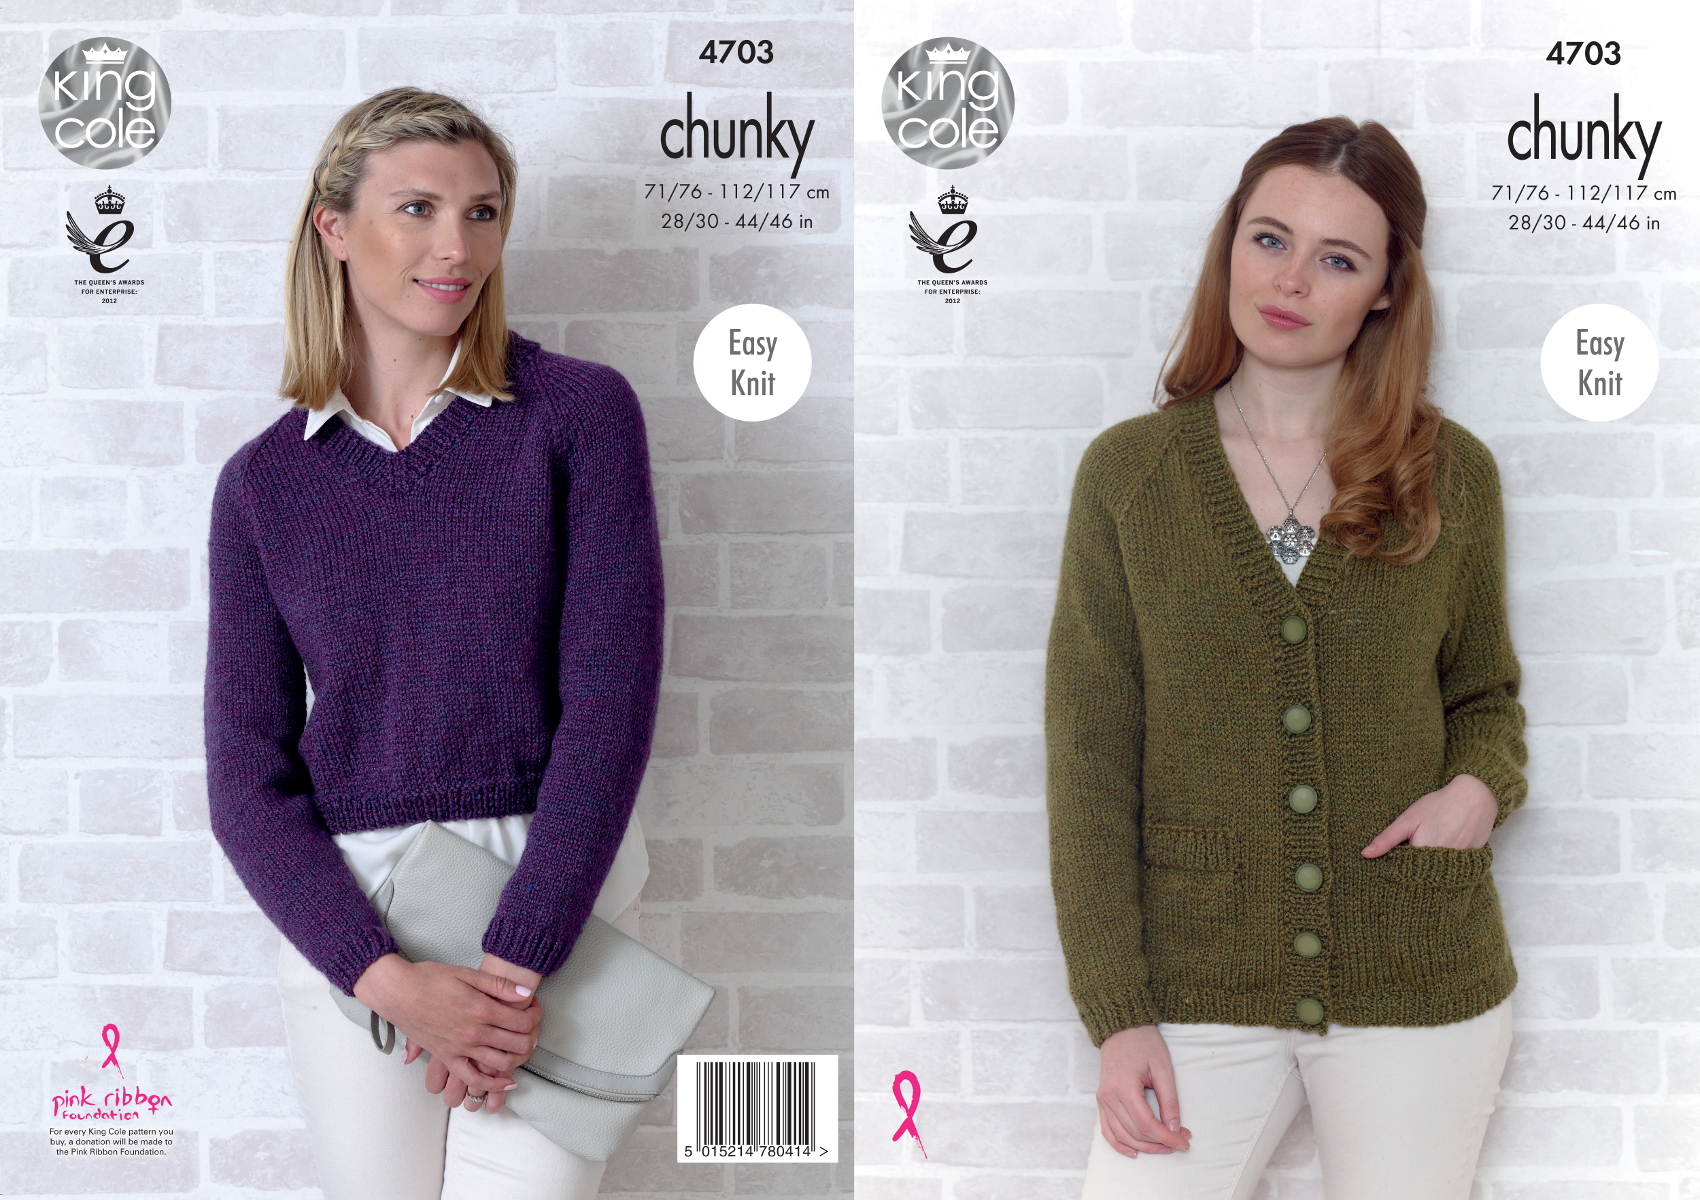 Easy Jumper Knitting Pattern Details About Easy Knit Raglan Jumper Cardigan Ladies Knitting Pattern King Cole Chunky 4703